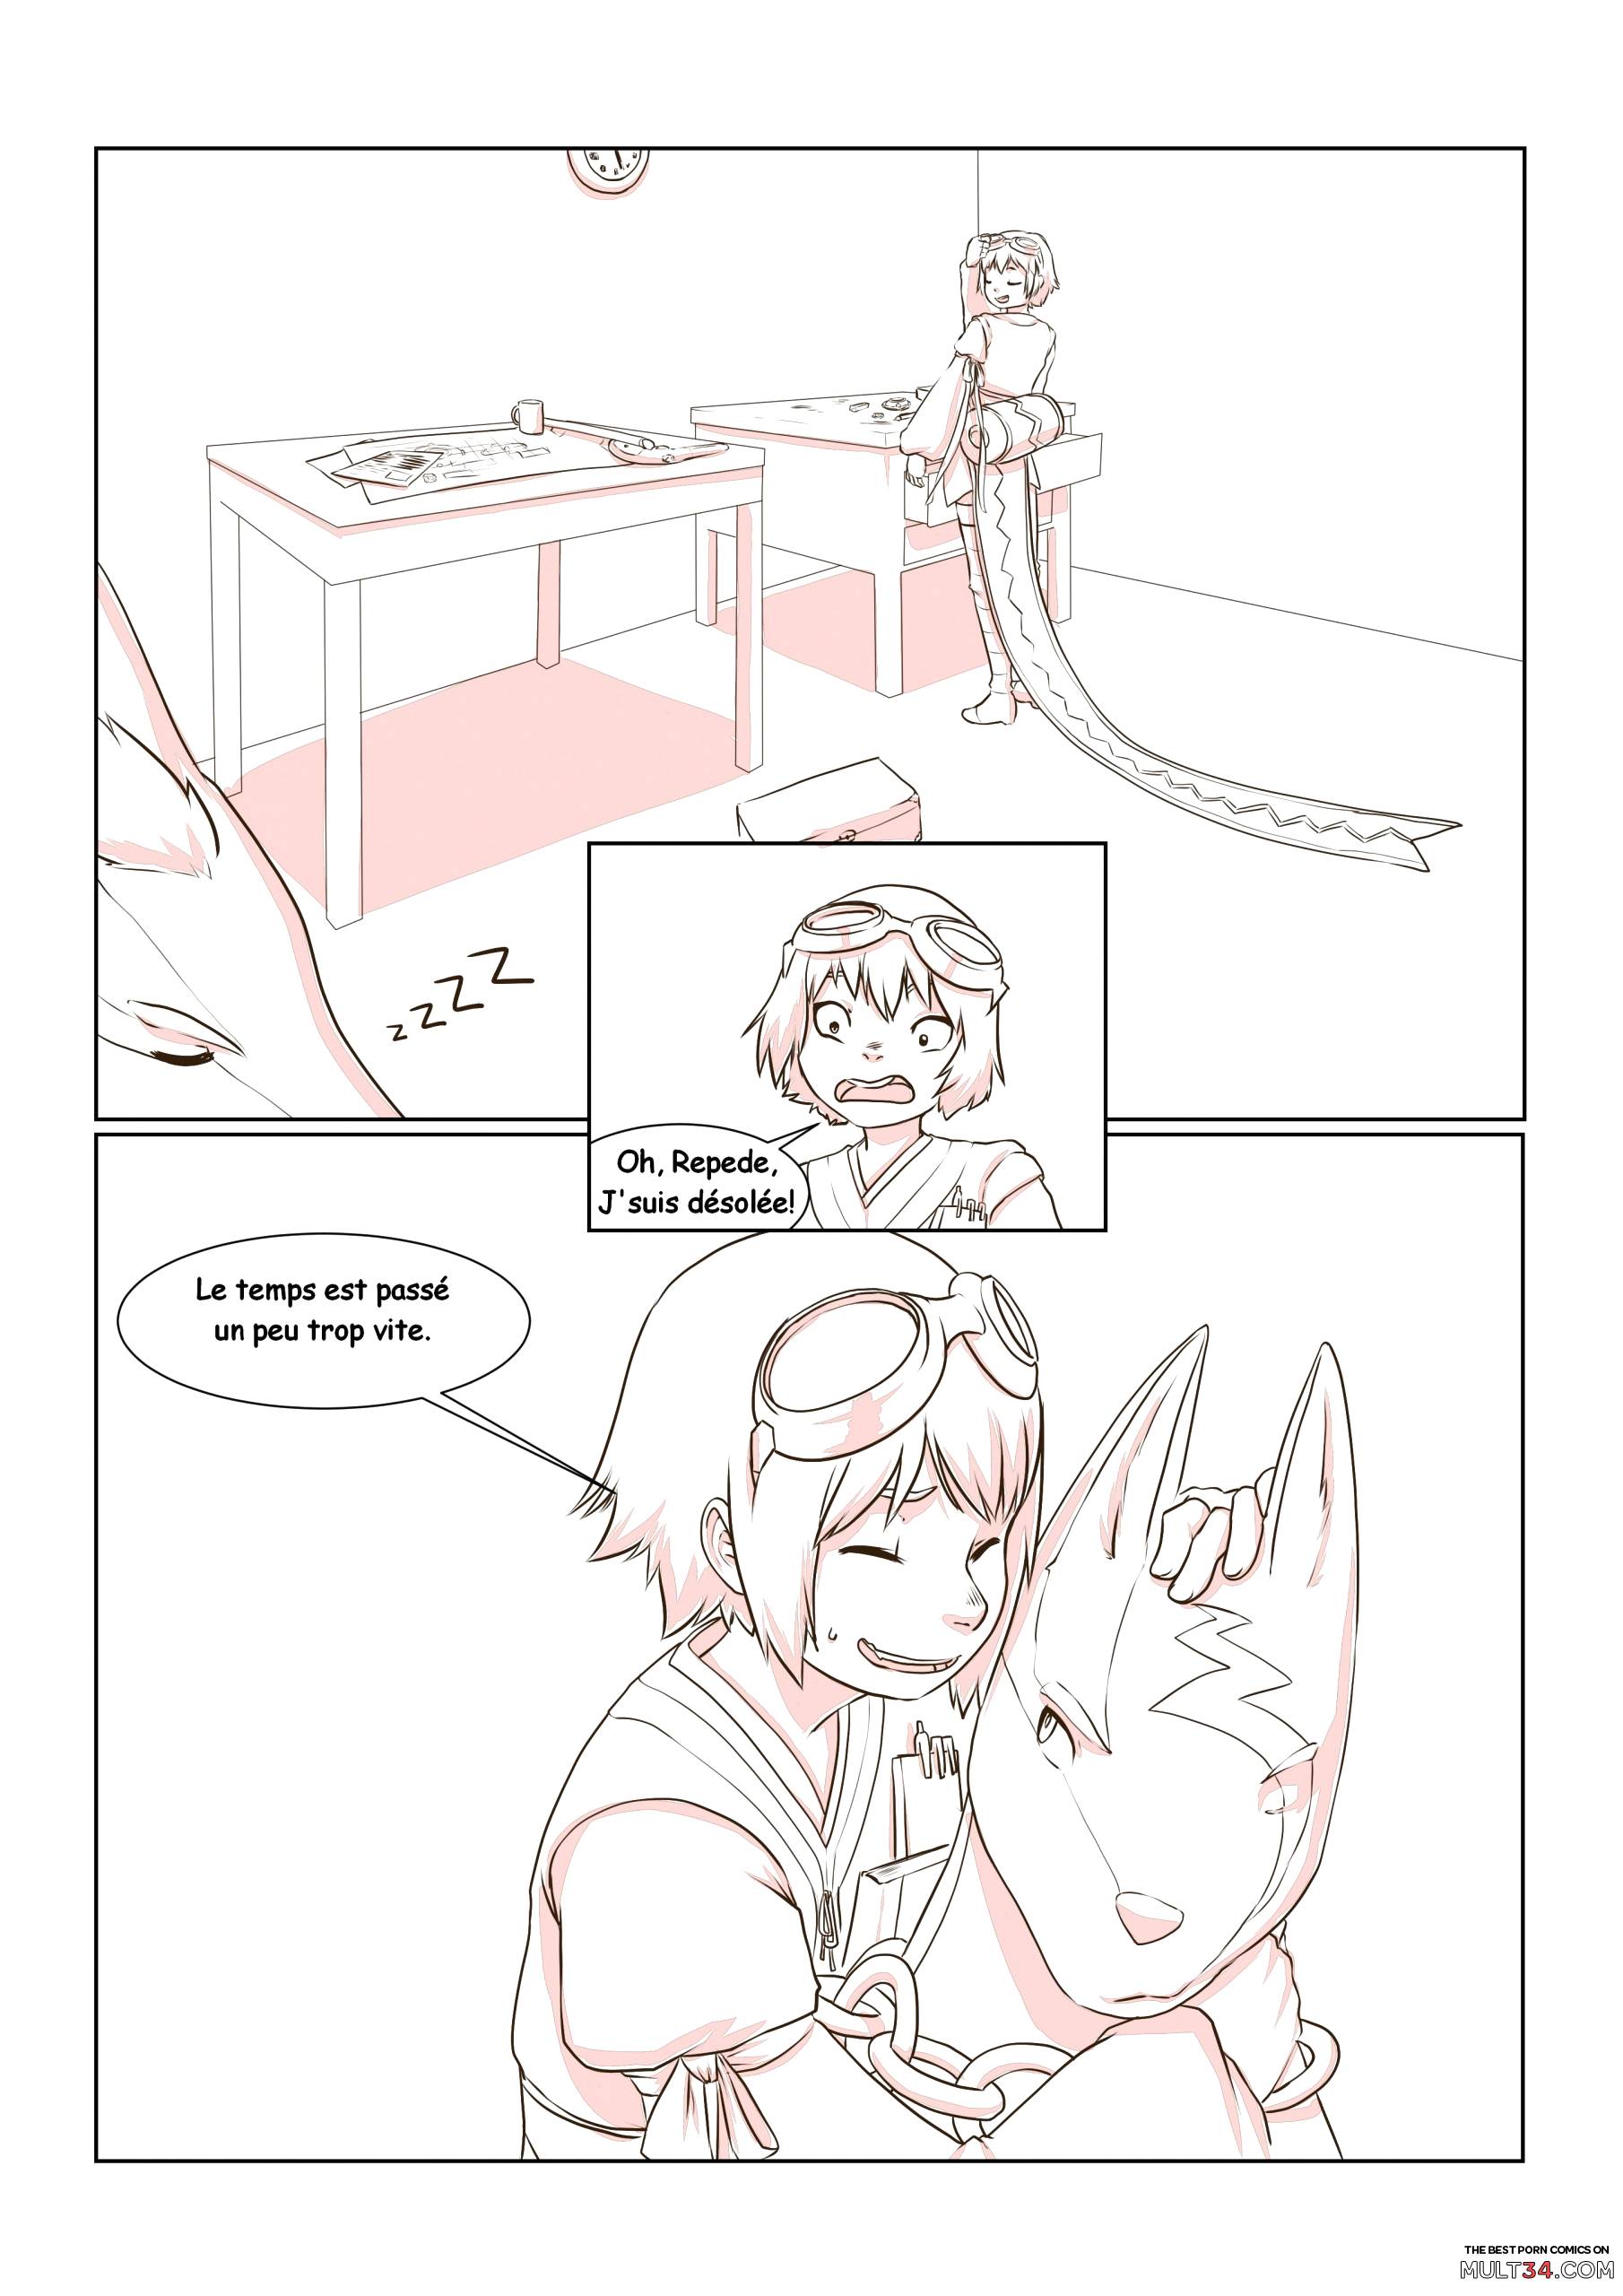 Tales of Rita and Repede - Episode 1 page 7